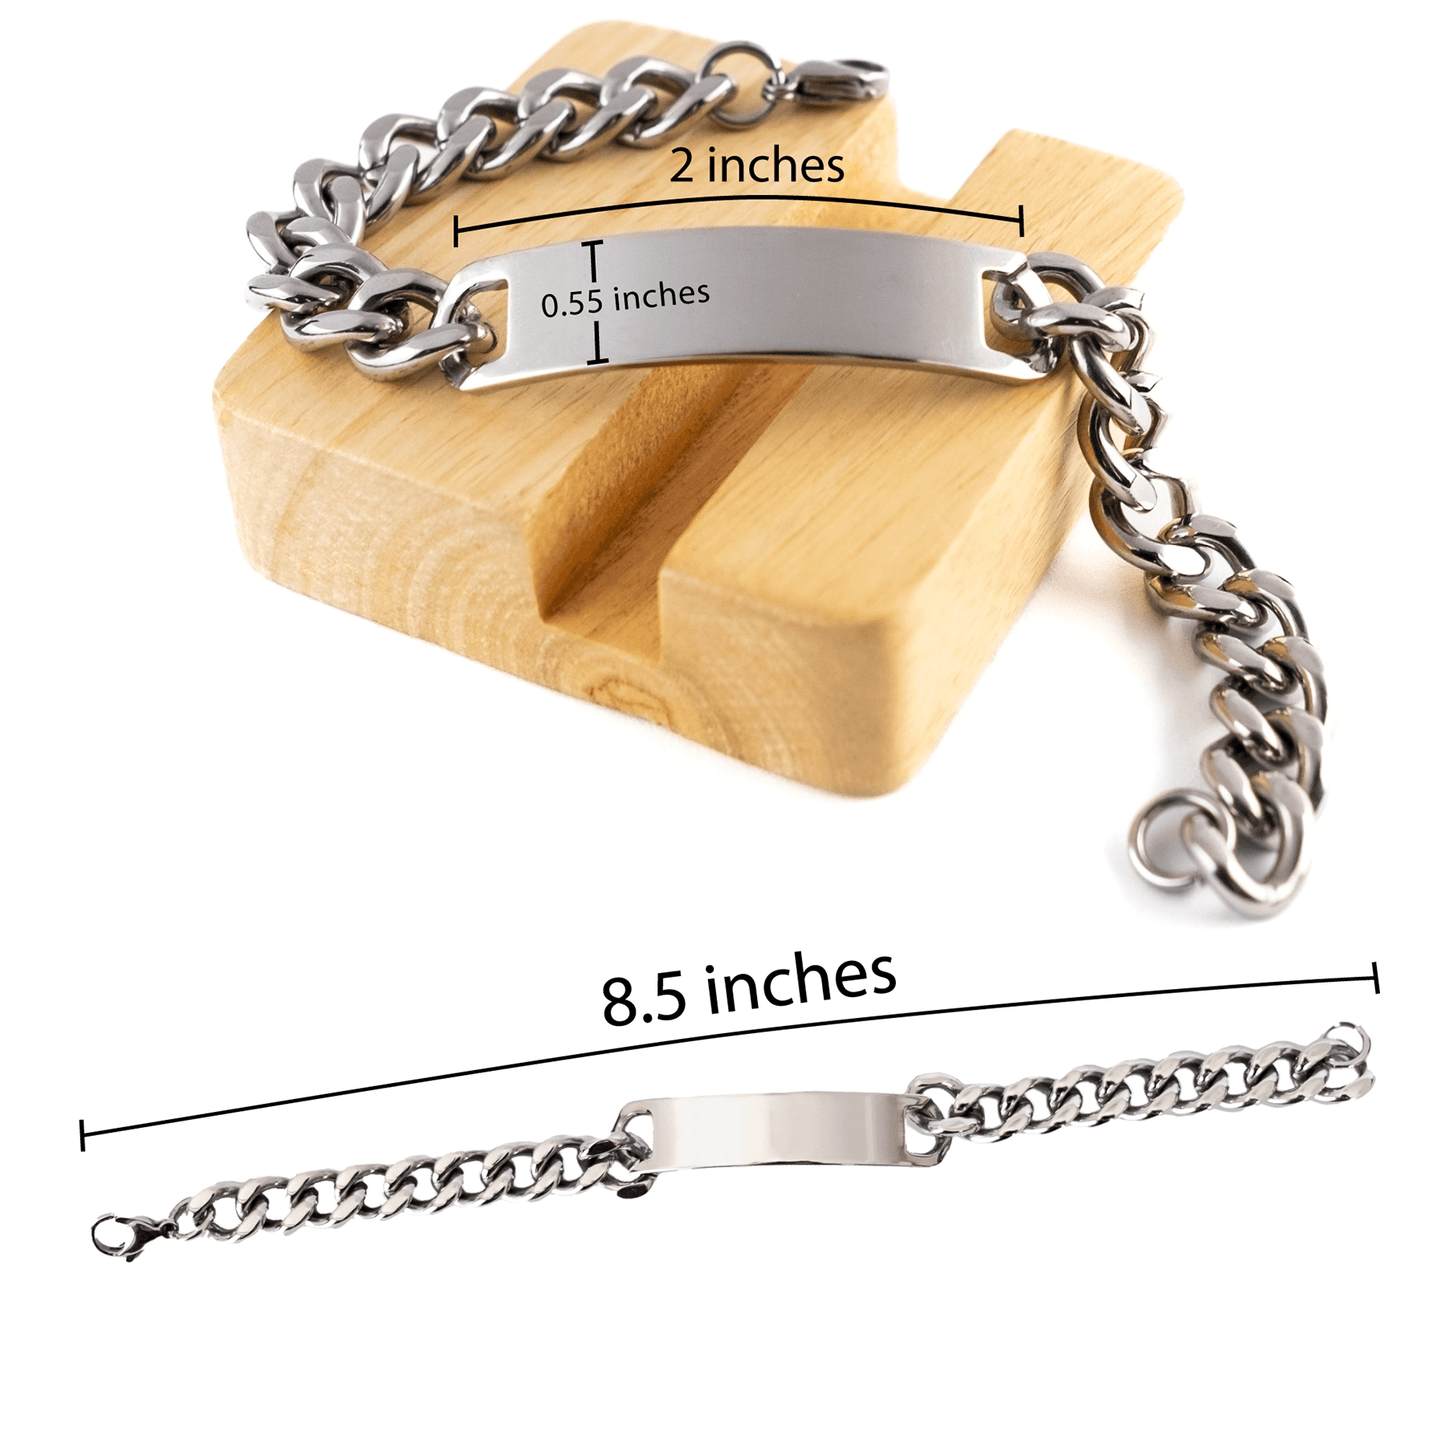 Remarkable CFO Gifts, Your dedication and hard work, Inspirational Birthday Christmas Unique Cuban Chain Stainless Steel Bracelet For CFO, Coworkers, Men, Women, Friends - Mallard Moon Gift Shop